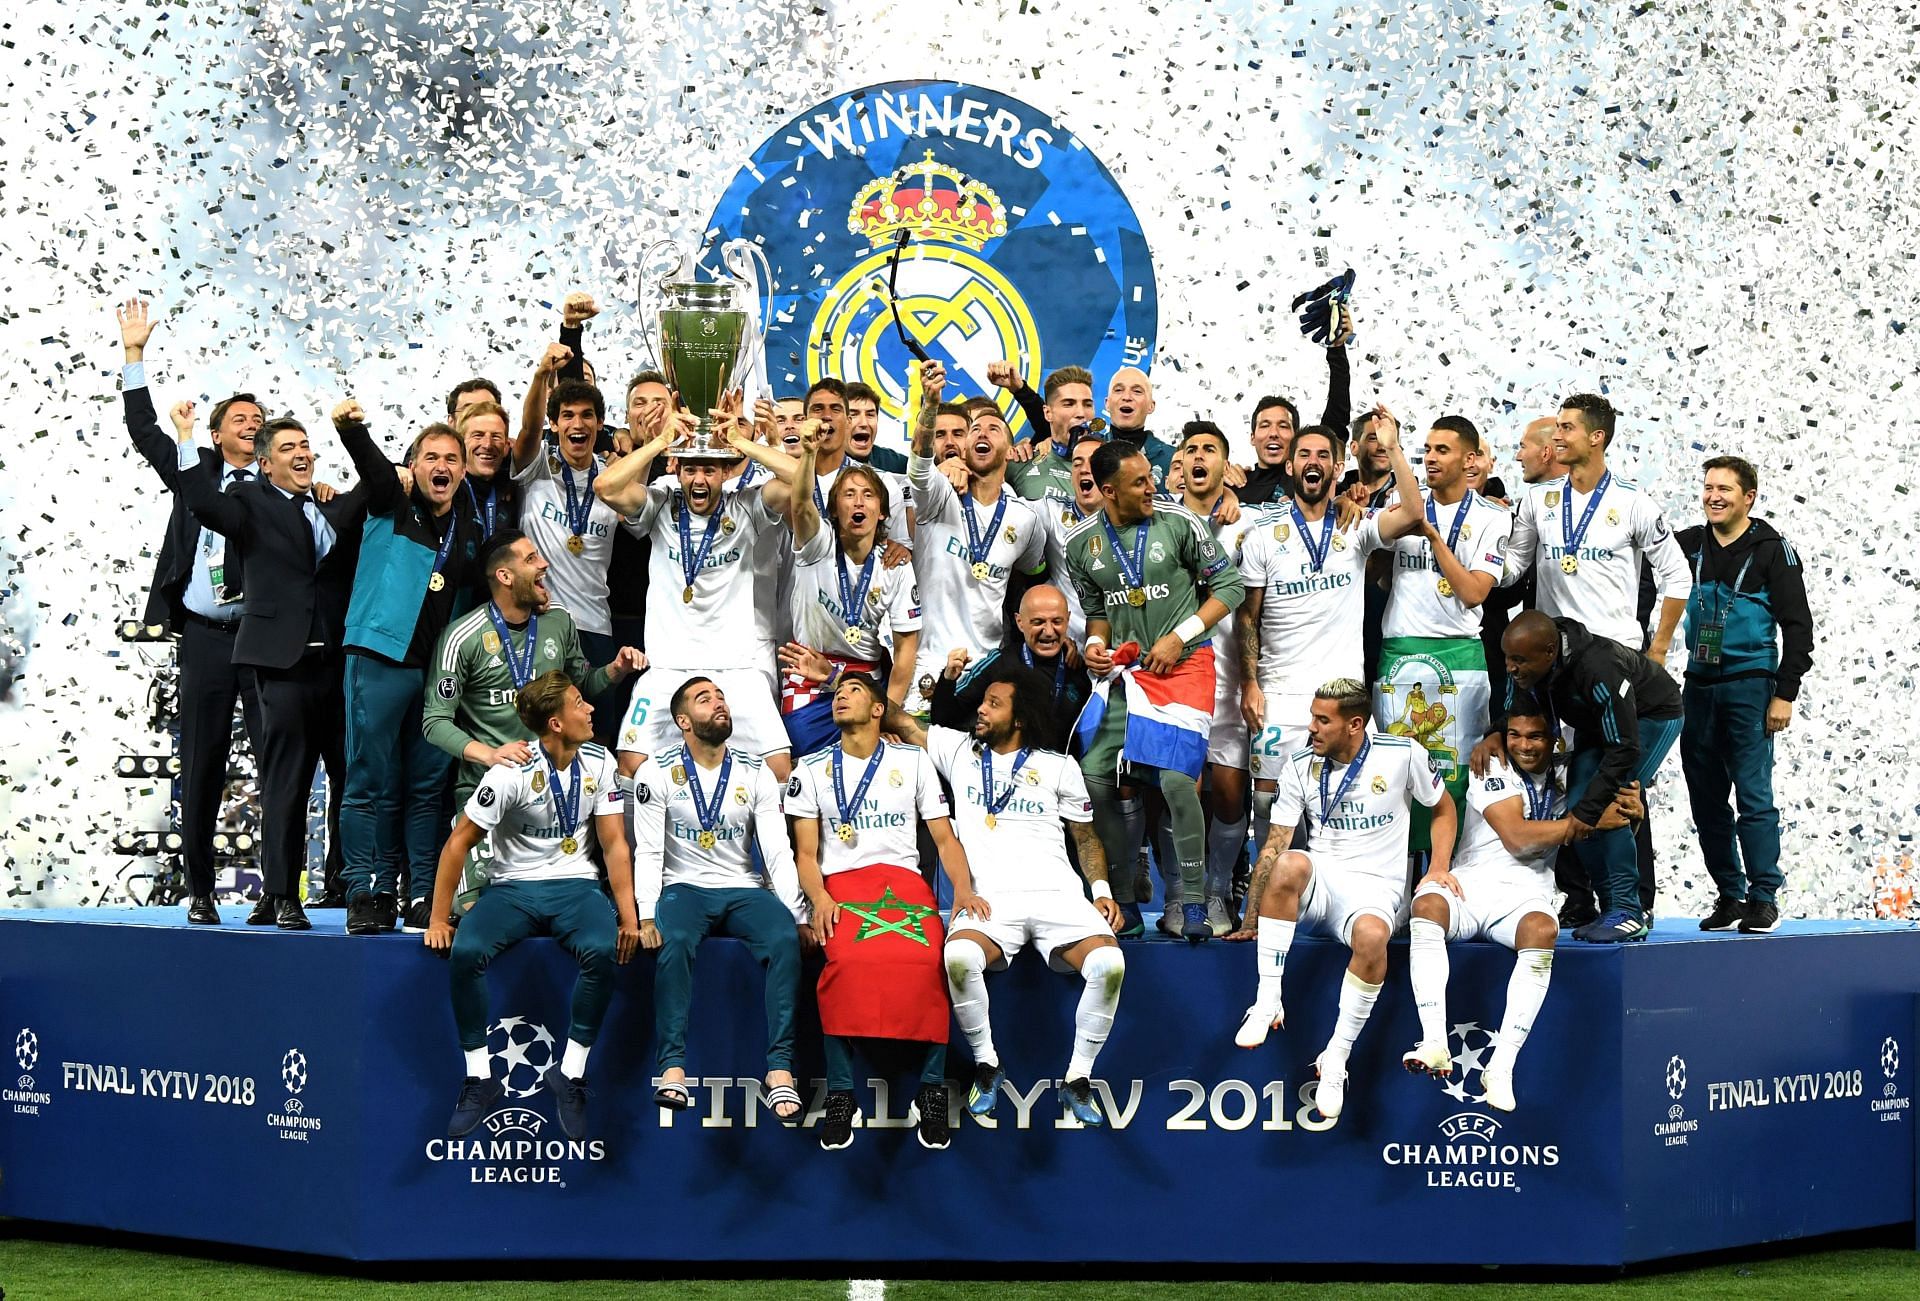 Real Madrid beat Liverpool in 2018 and won their third consecutive UCL title